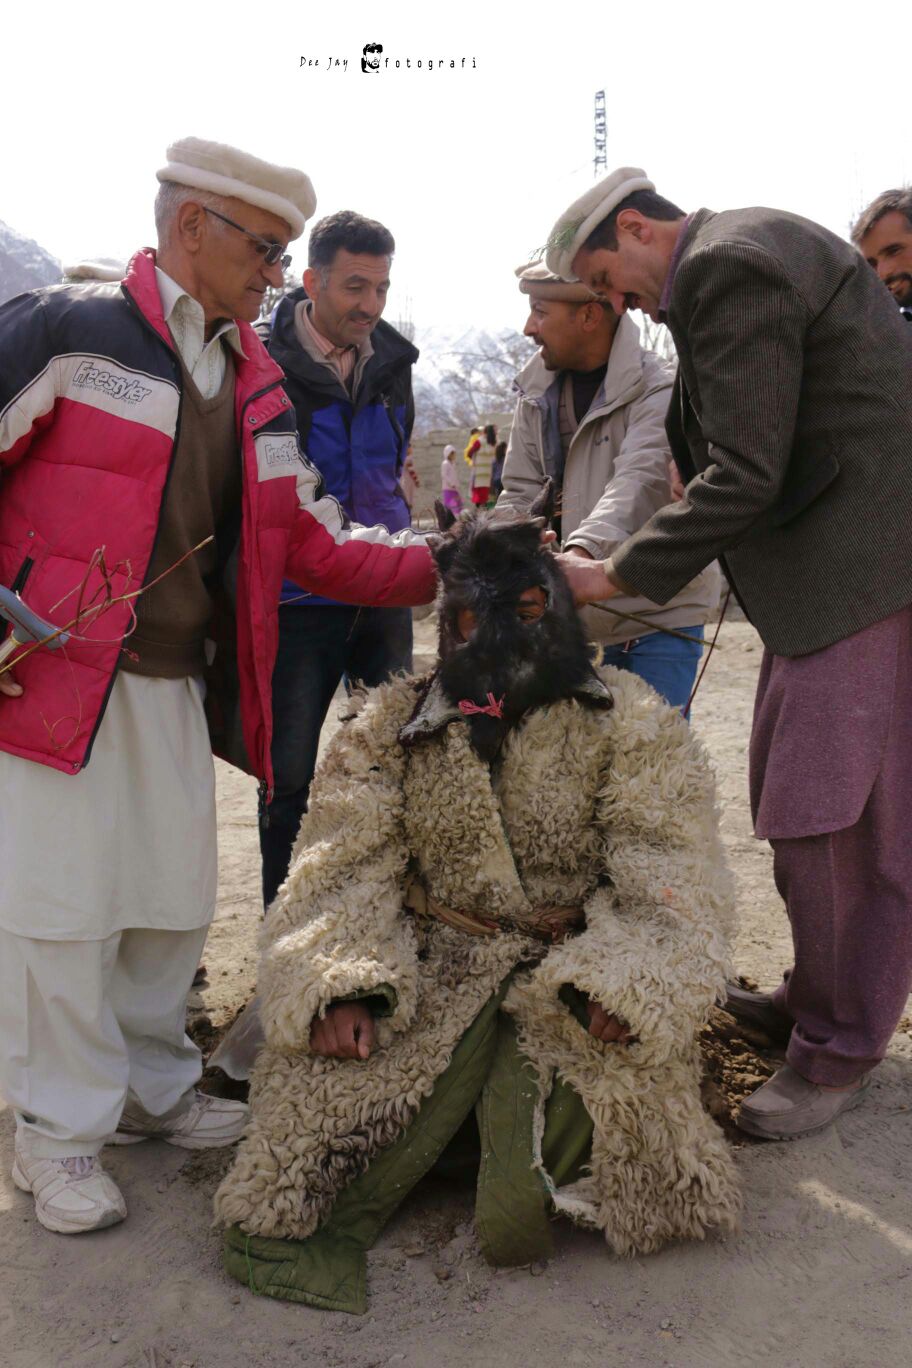 A man dressed to appear as an Oxen is being prepared for the show. Photo: Deedar Ali 